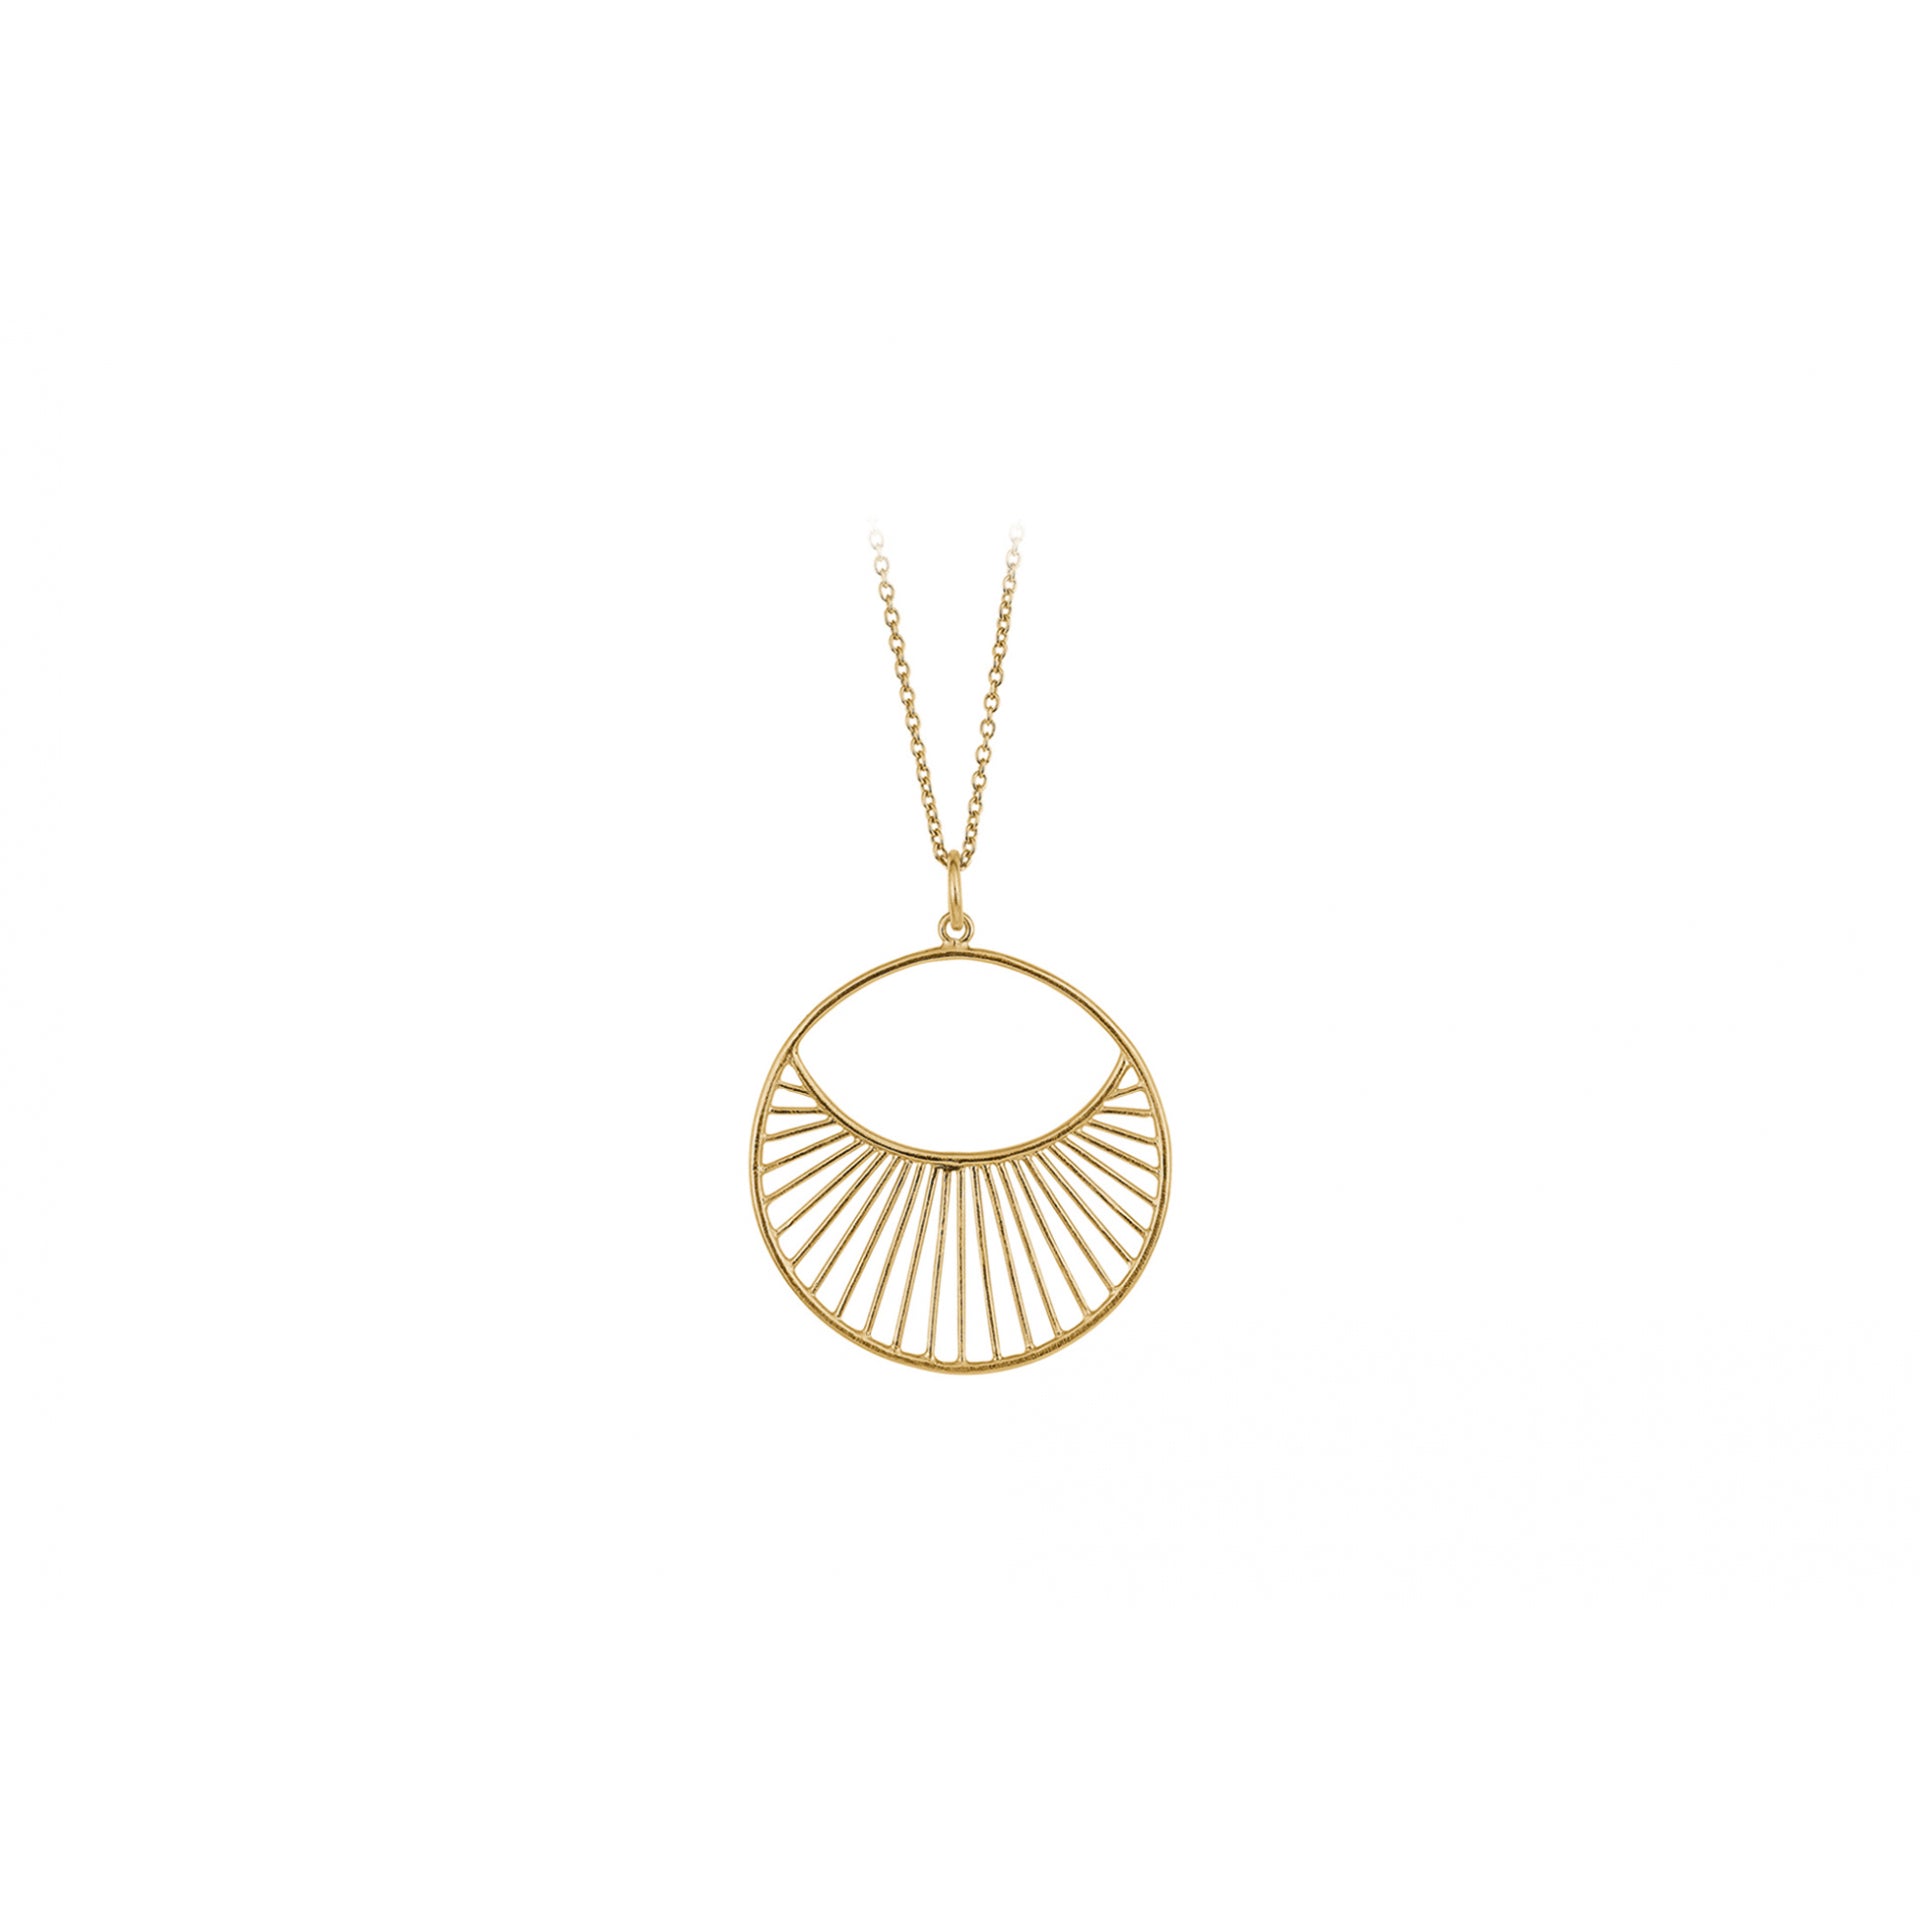 Daylight Necklace in Gold, Short